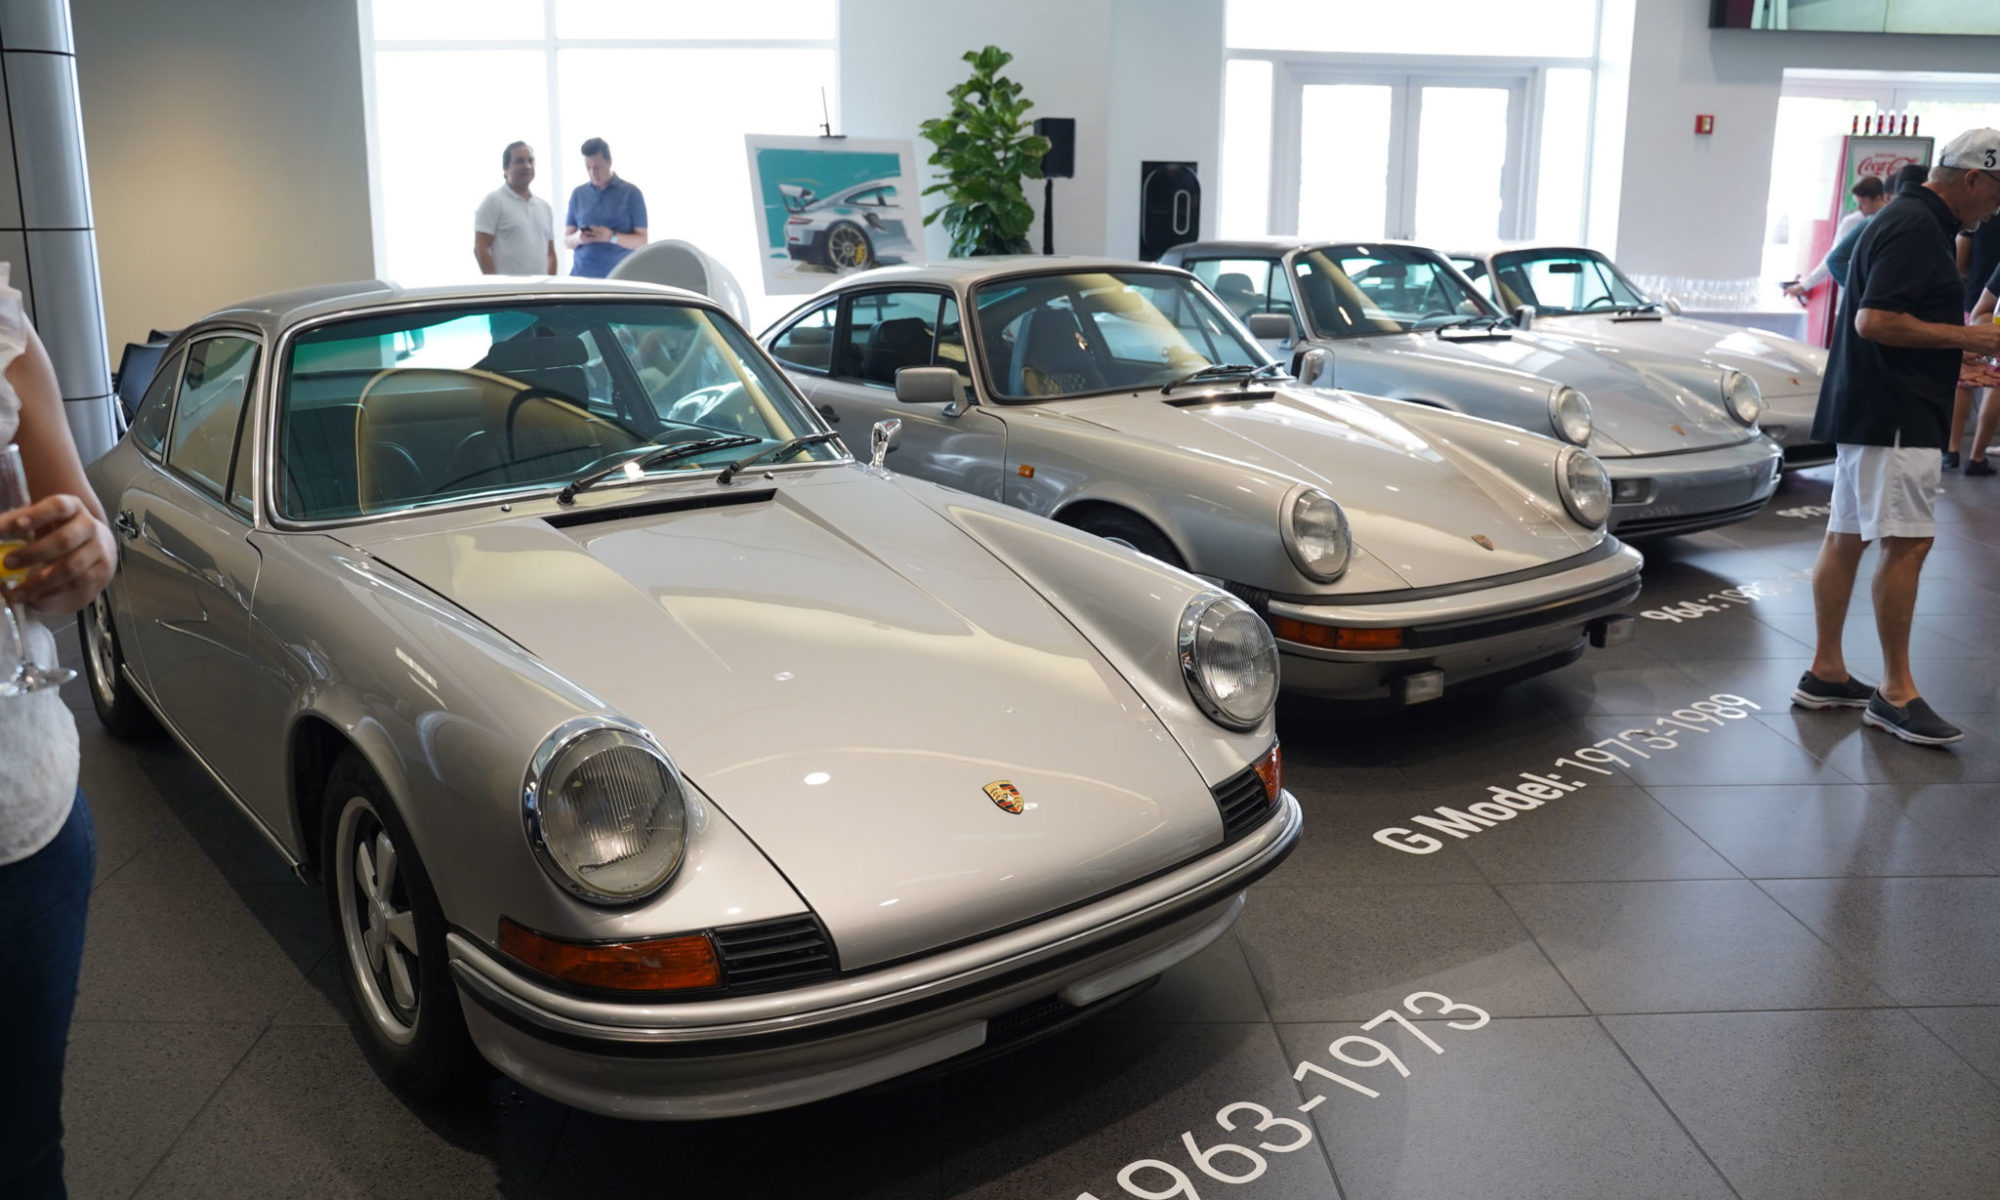 four silver porsche vehicles in a row at the september rise and drive event at the collection